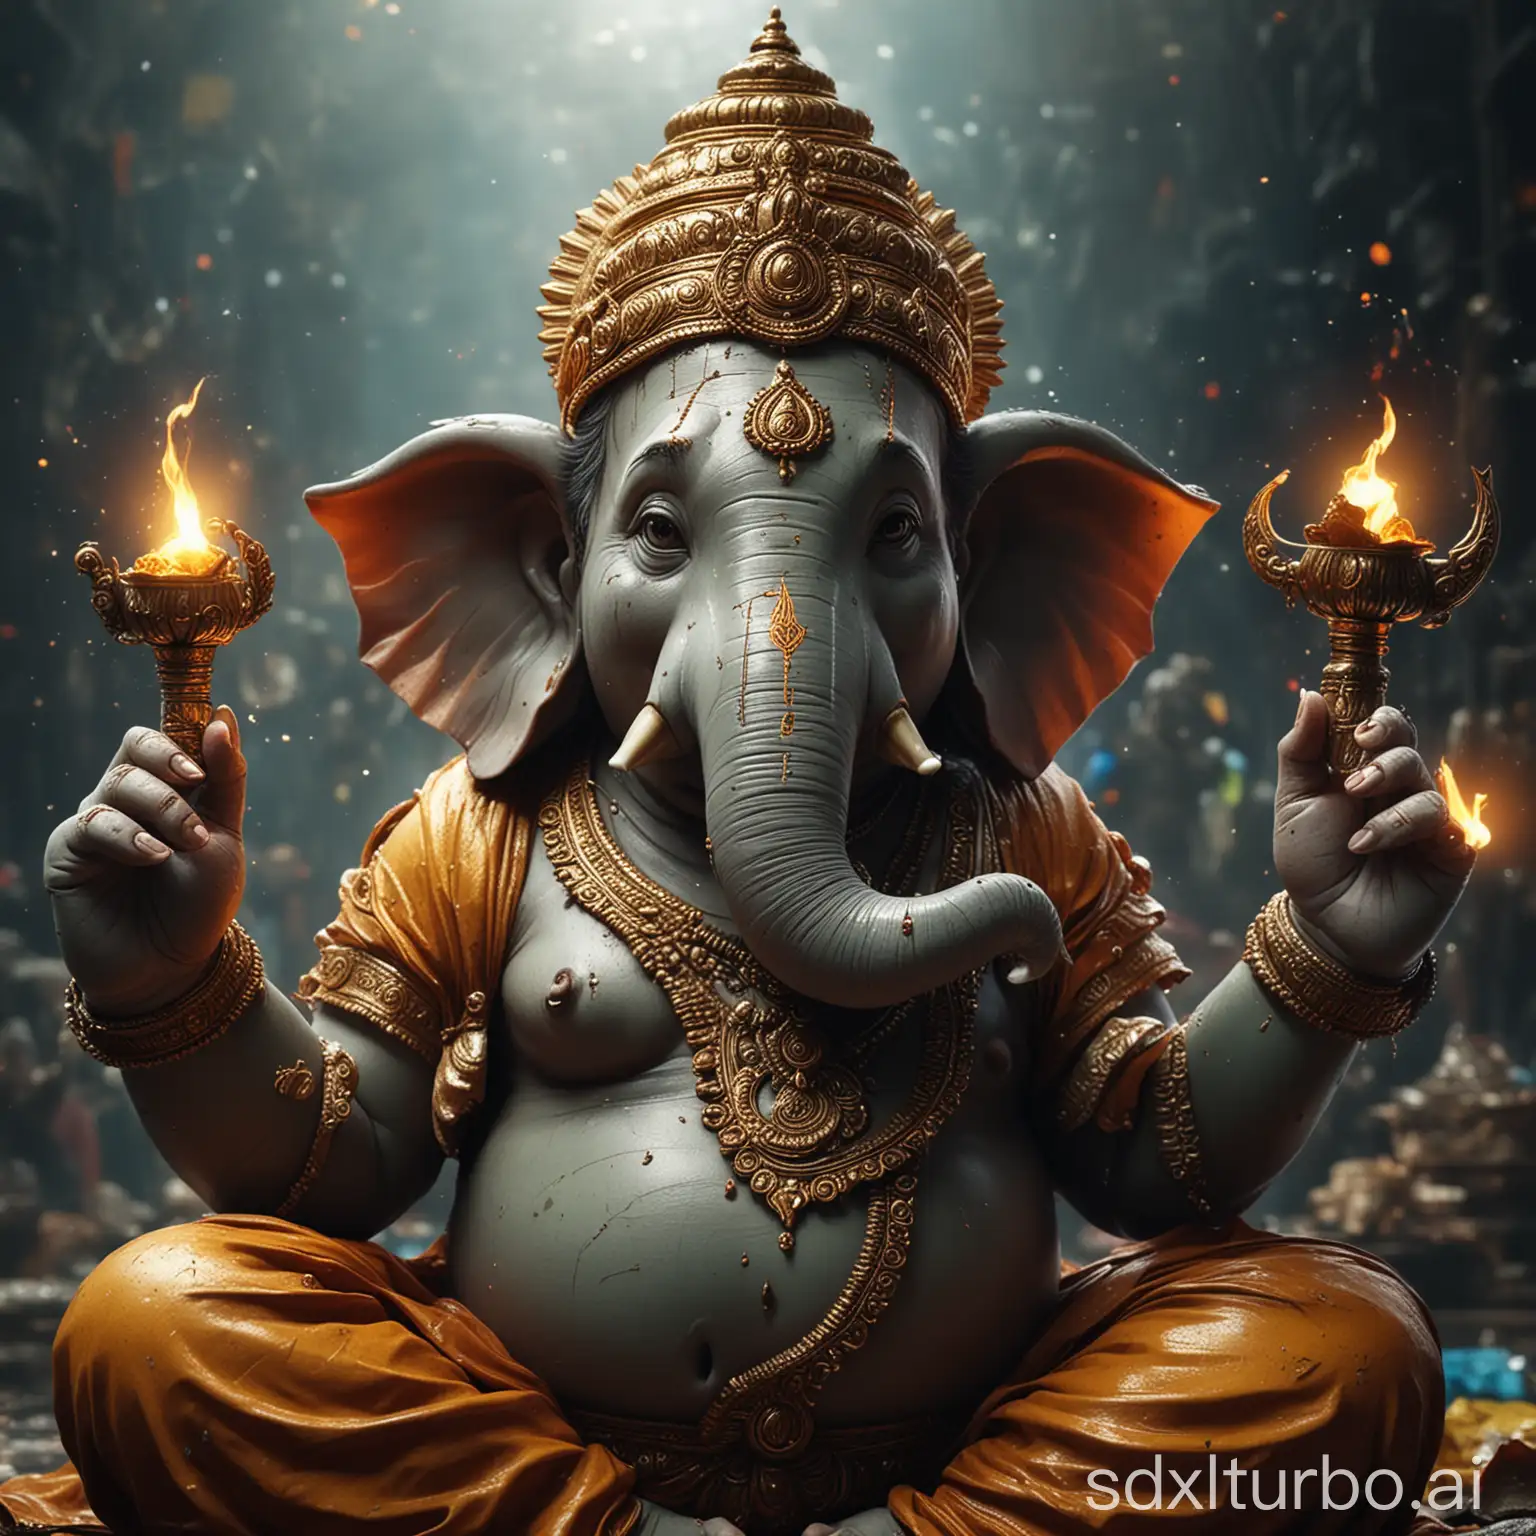 Create an ultra HD realistic image of lord Ganesh. The entire image should be glowing, focused, Cinematic reflections and used vibrant color